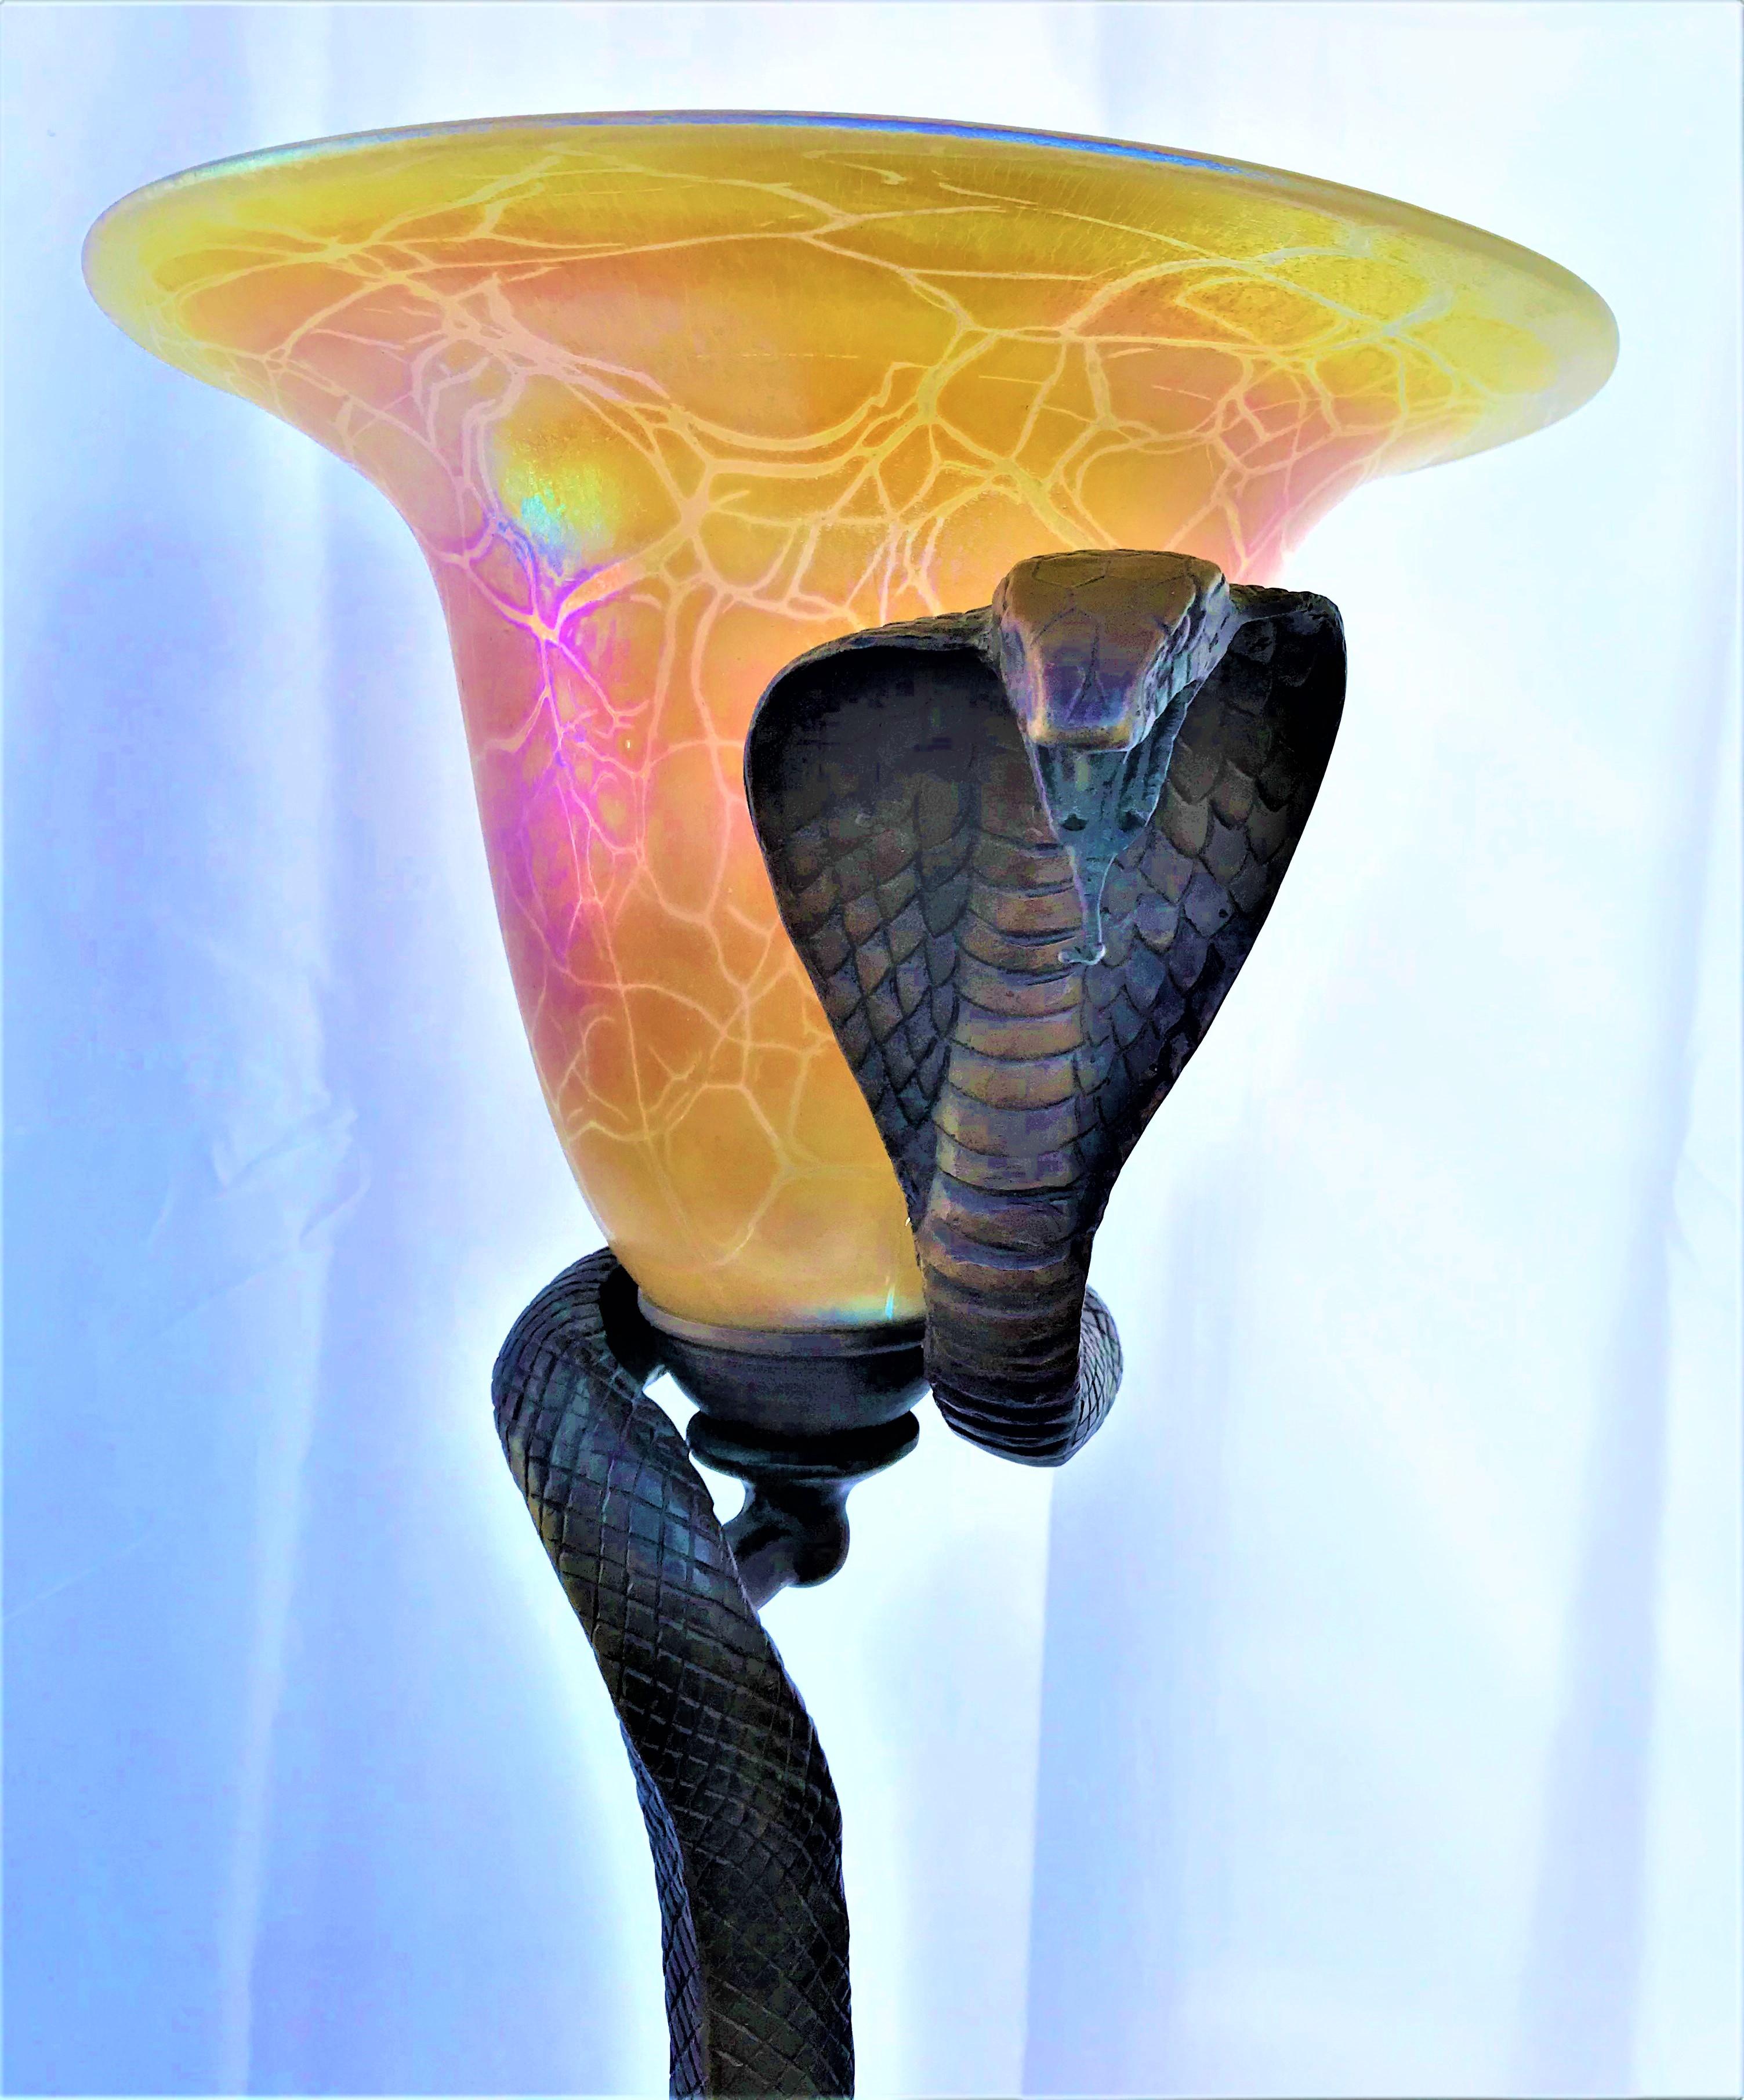 A mid-size Cobra snake floor lamp contemporary bronze lamp. With a gold favrile snake skin design glass shade. Bronze patina finish mounted on an absolute black hi-polished marble base. Made after E. Brandt design. From a private collector in LA.